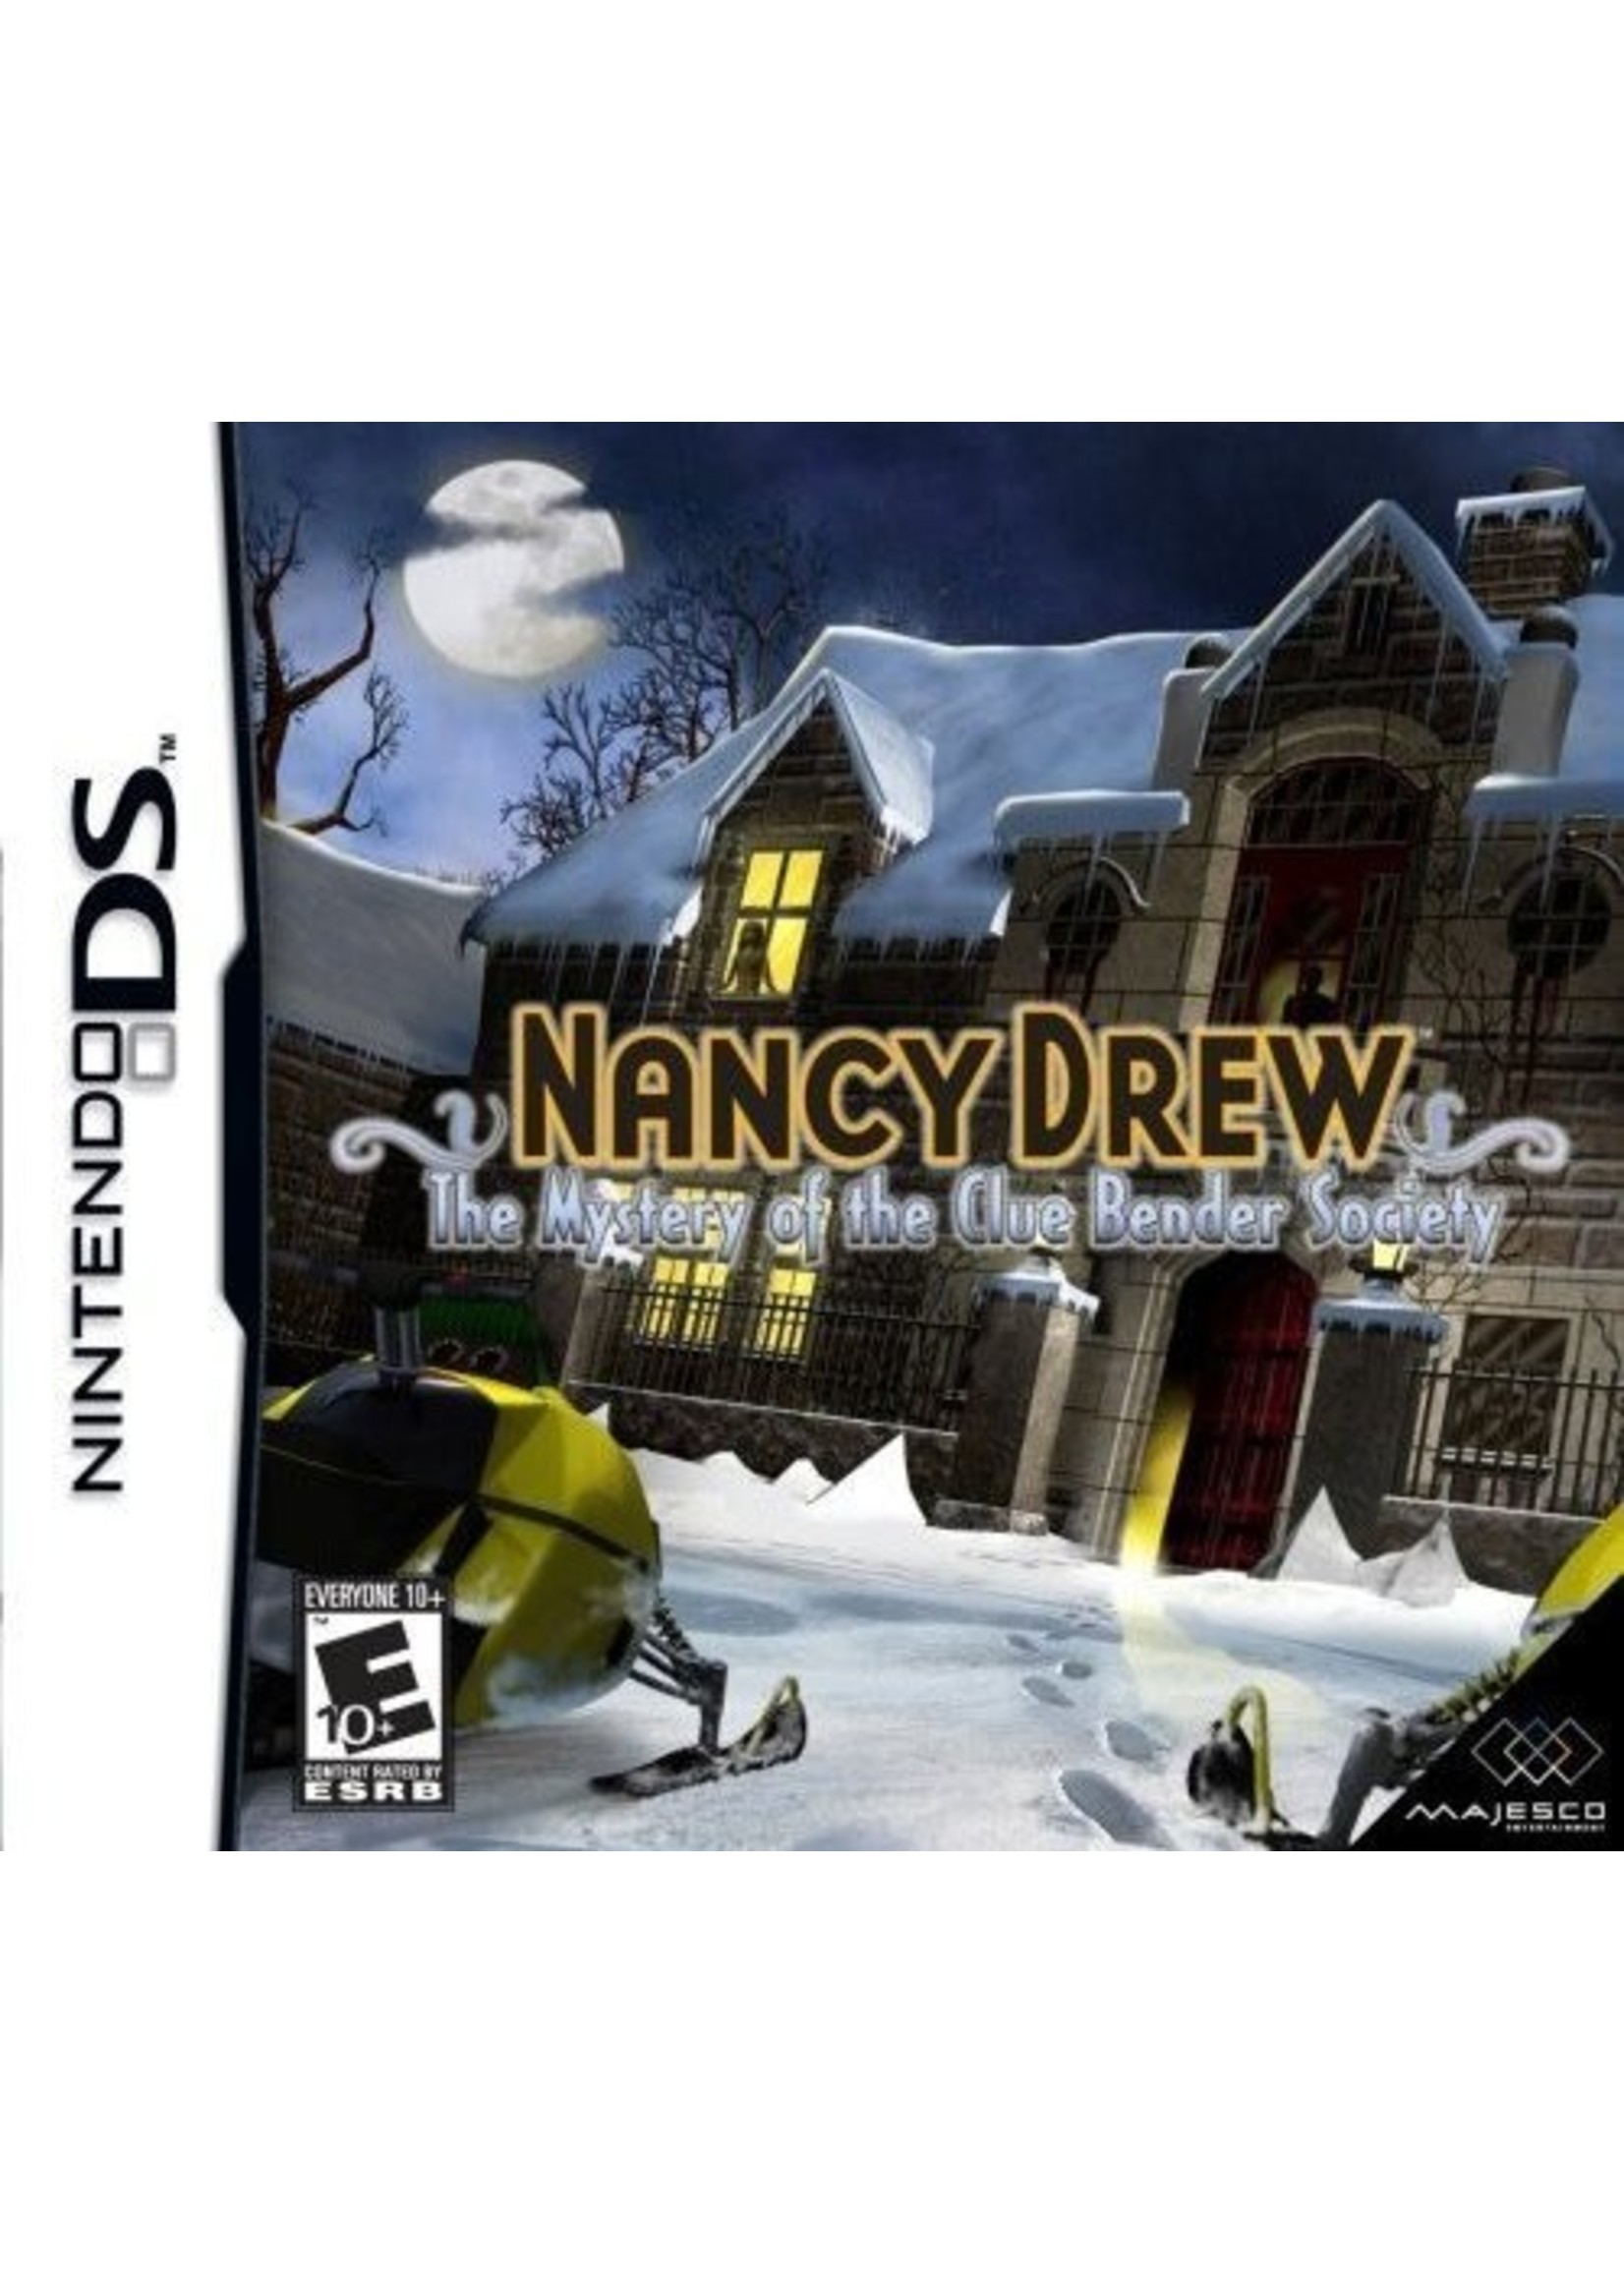 Nintendo DS Nancy Drew The Mystery of the Clue Bender Society - Cart Only